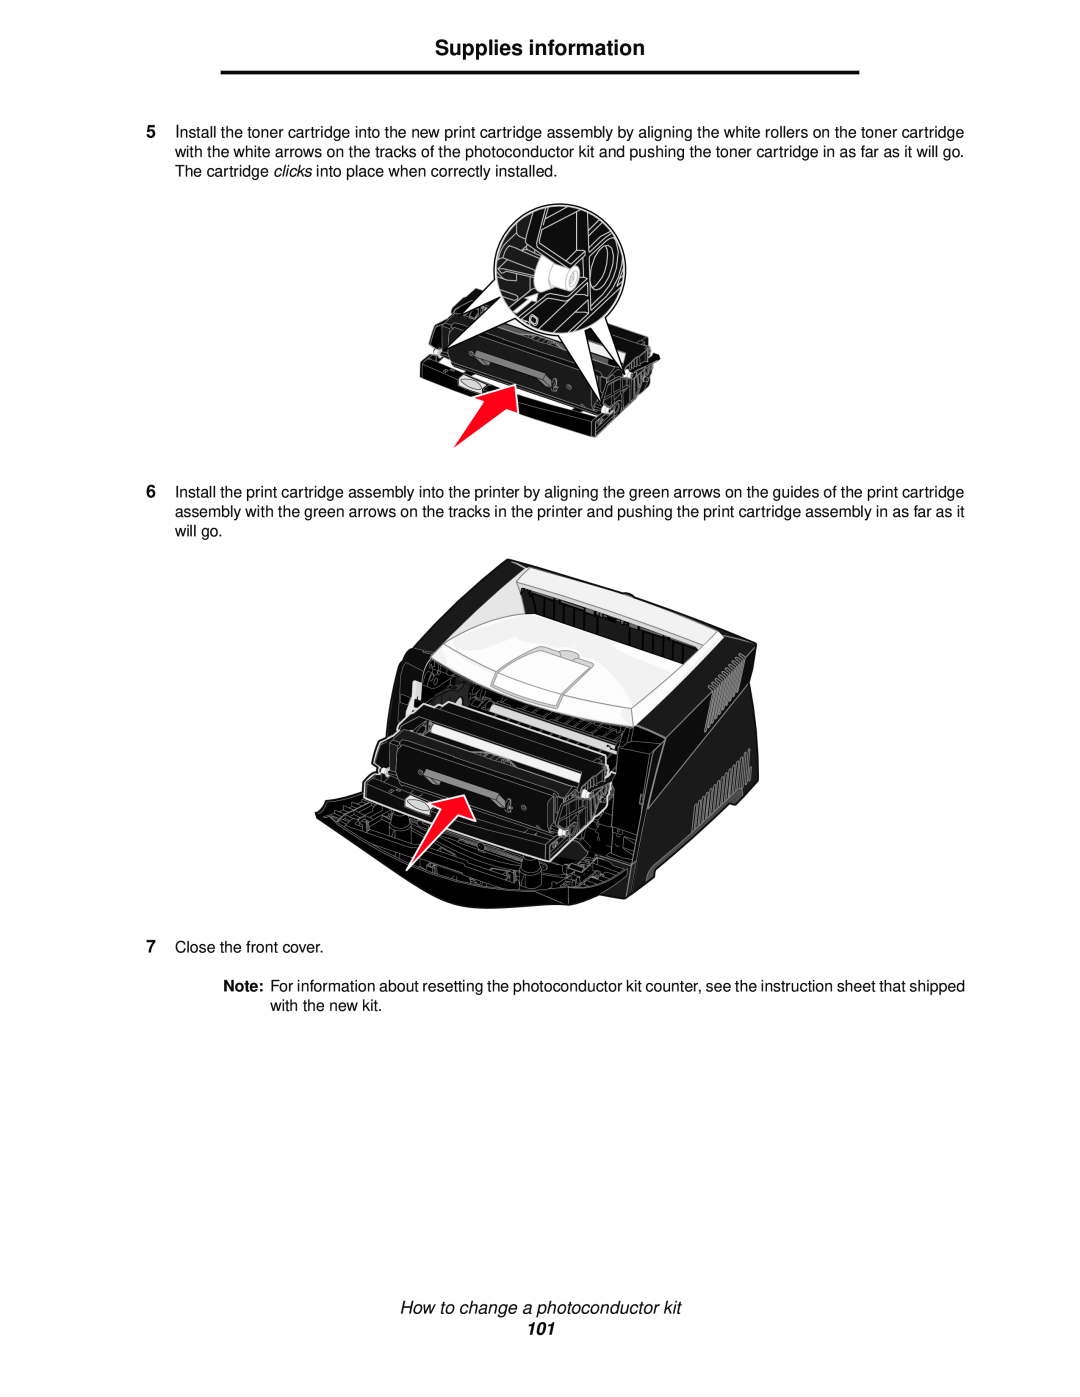 Lexmark 340, 342n manual Supplies information, How to change a photoconductor kit 